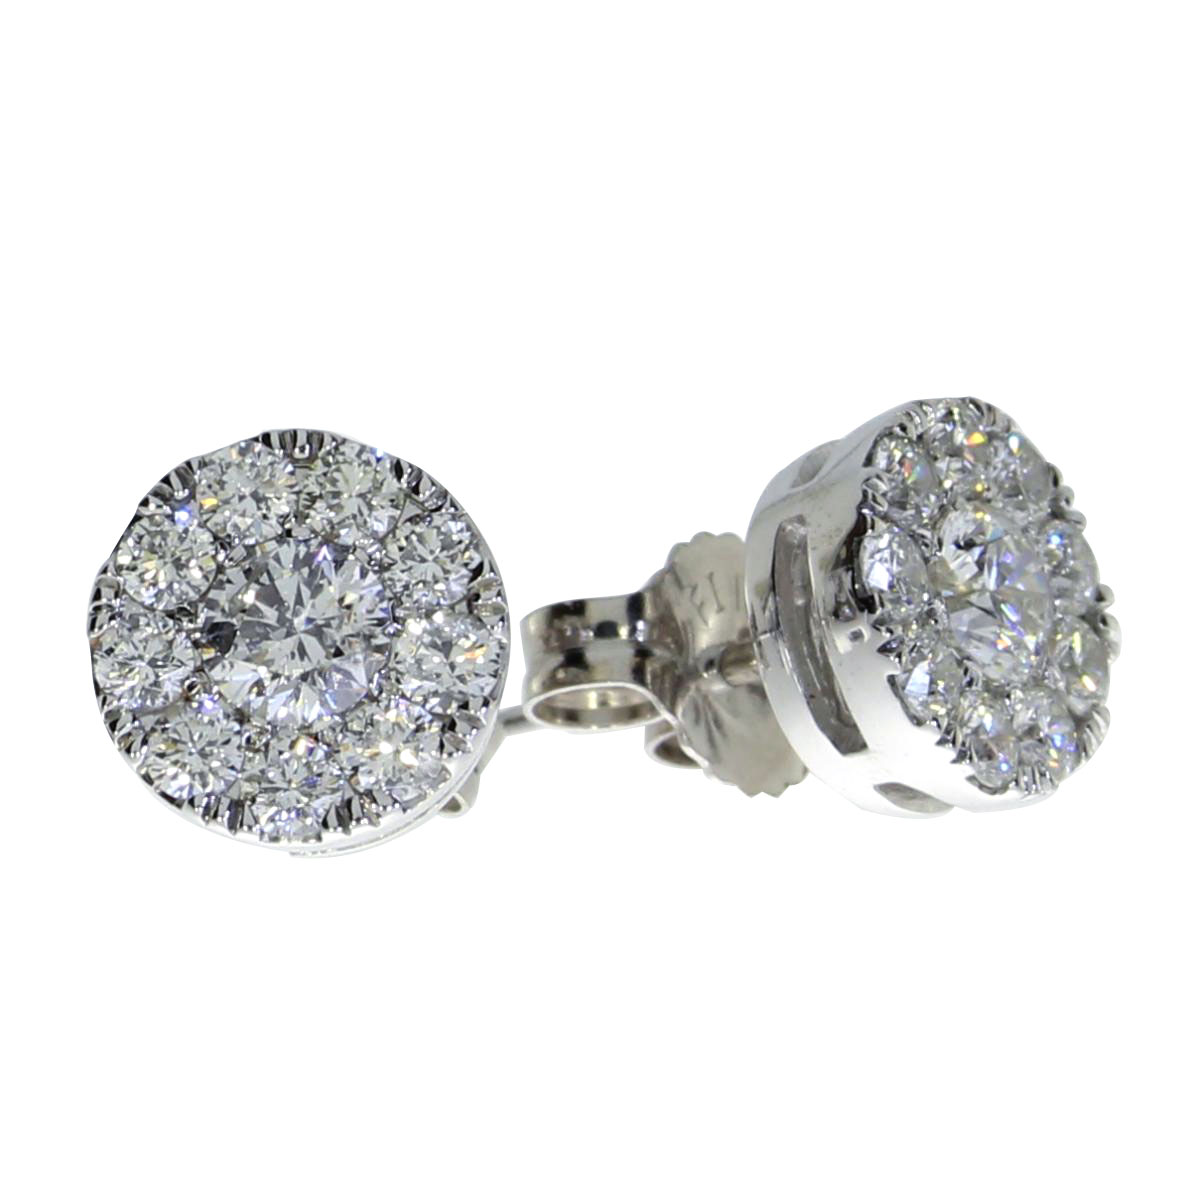 JCX2498: Gorgeous 14k white gold earrings with a .75 total carat cluster of shimmering high quality diamonds.